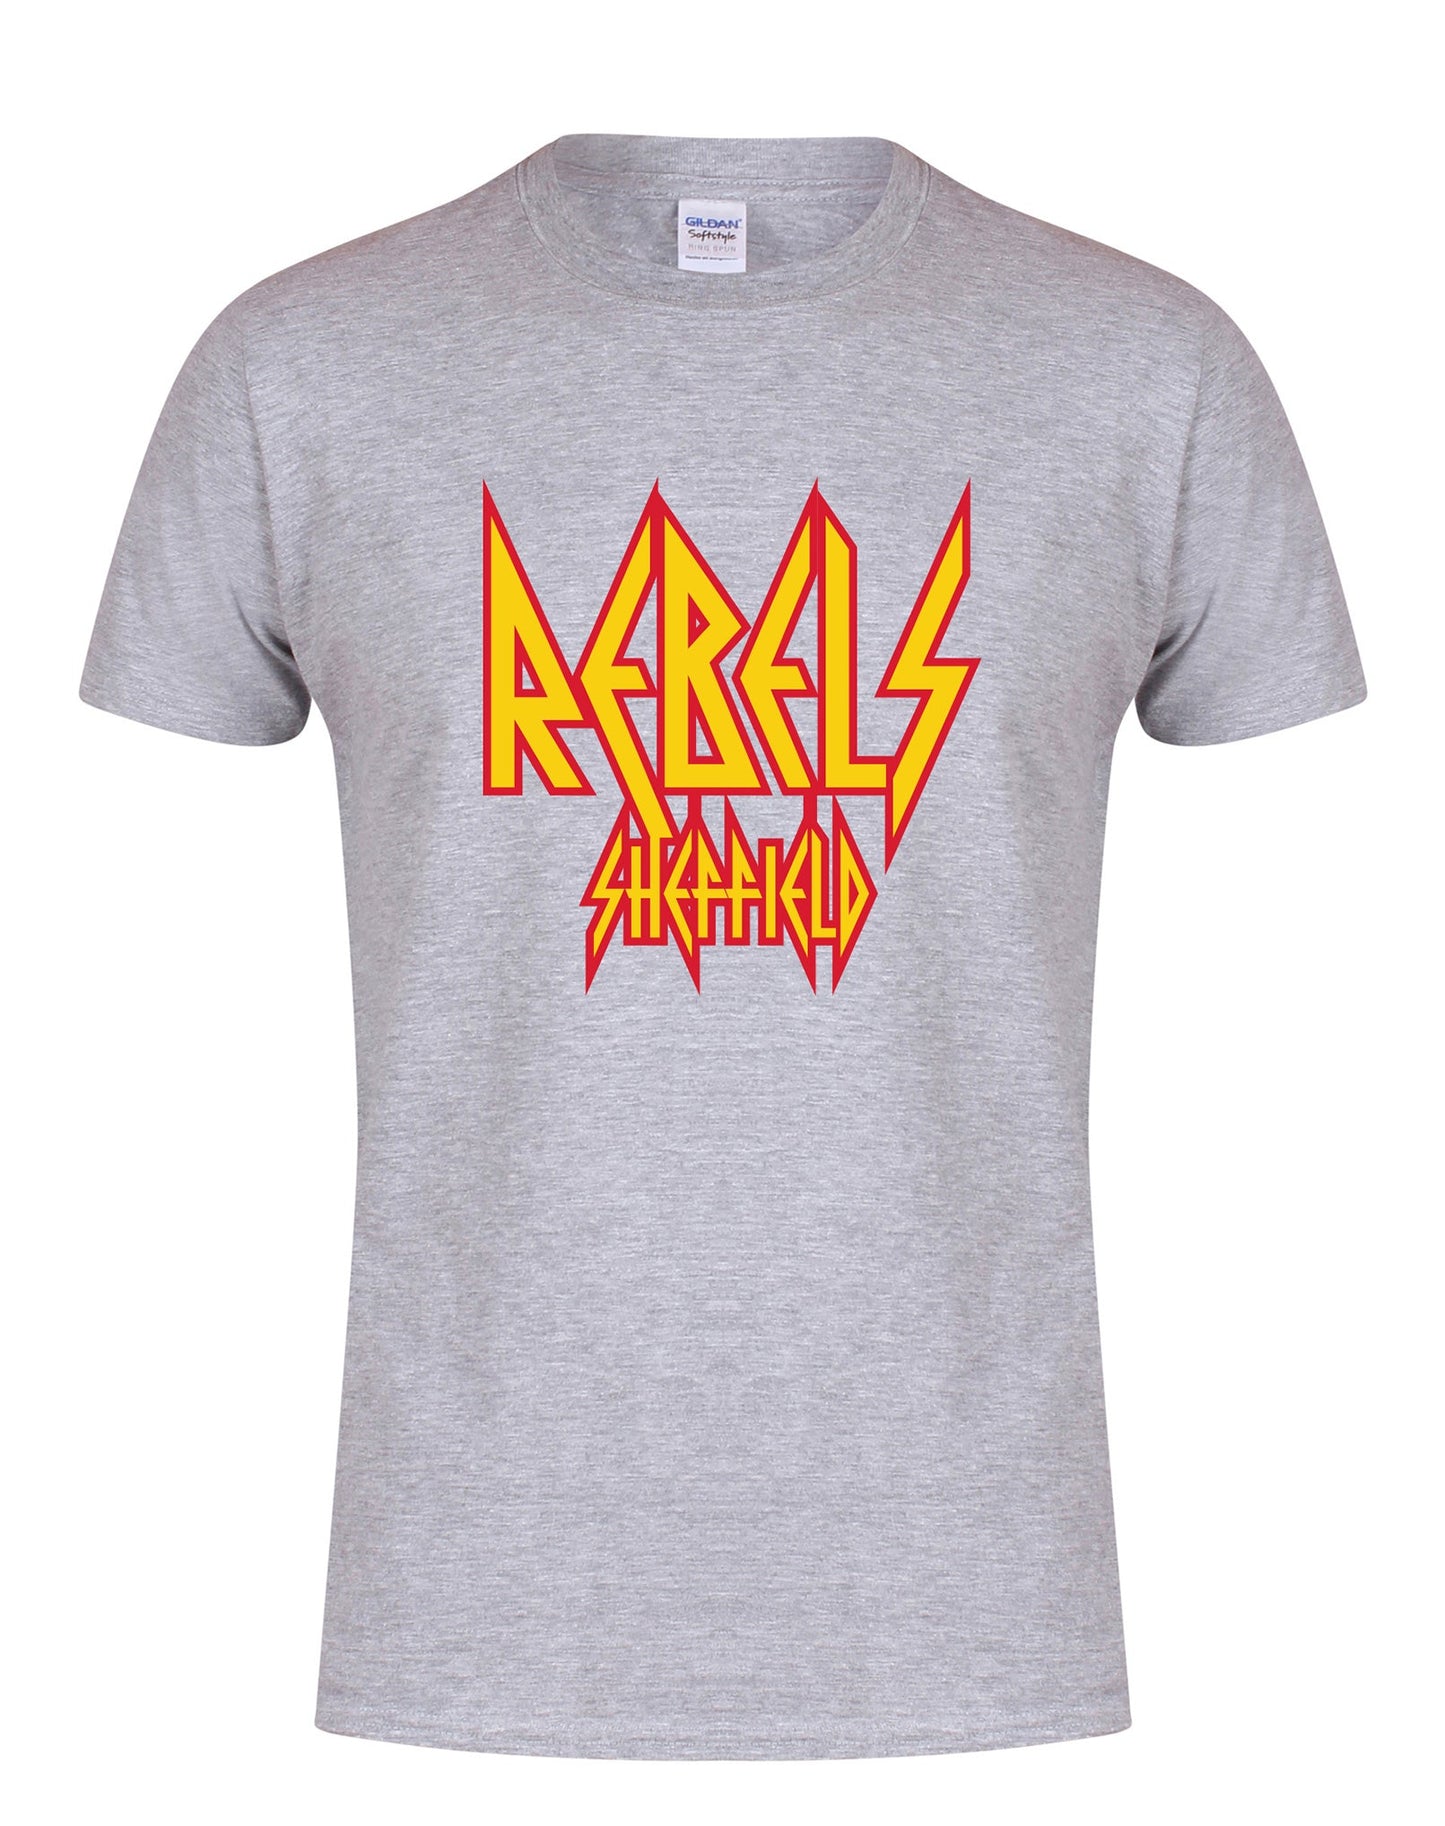 Rebels - Def Leppard design - unisex fit T-shirt - various colours - Dirty Stop Outs